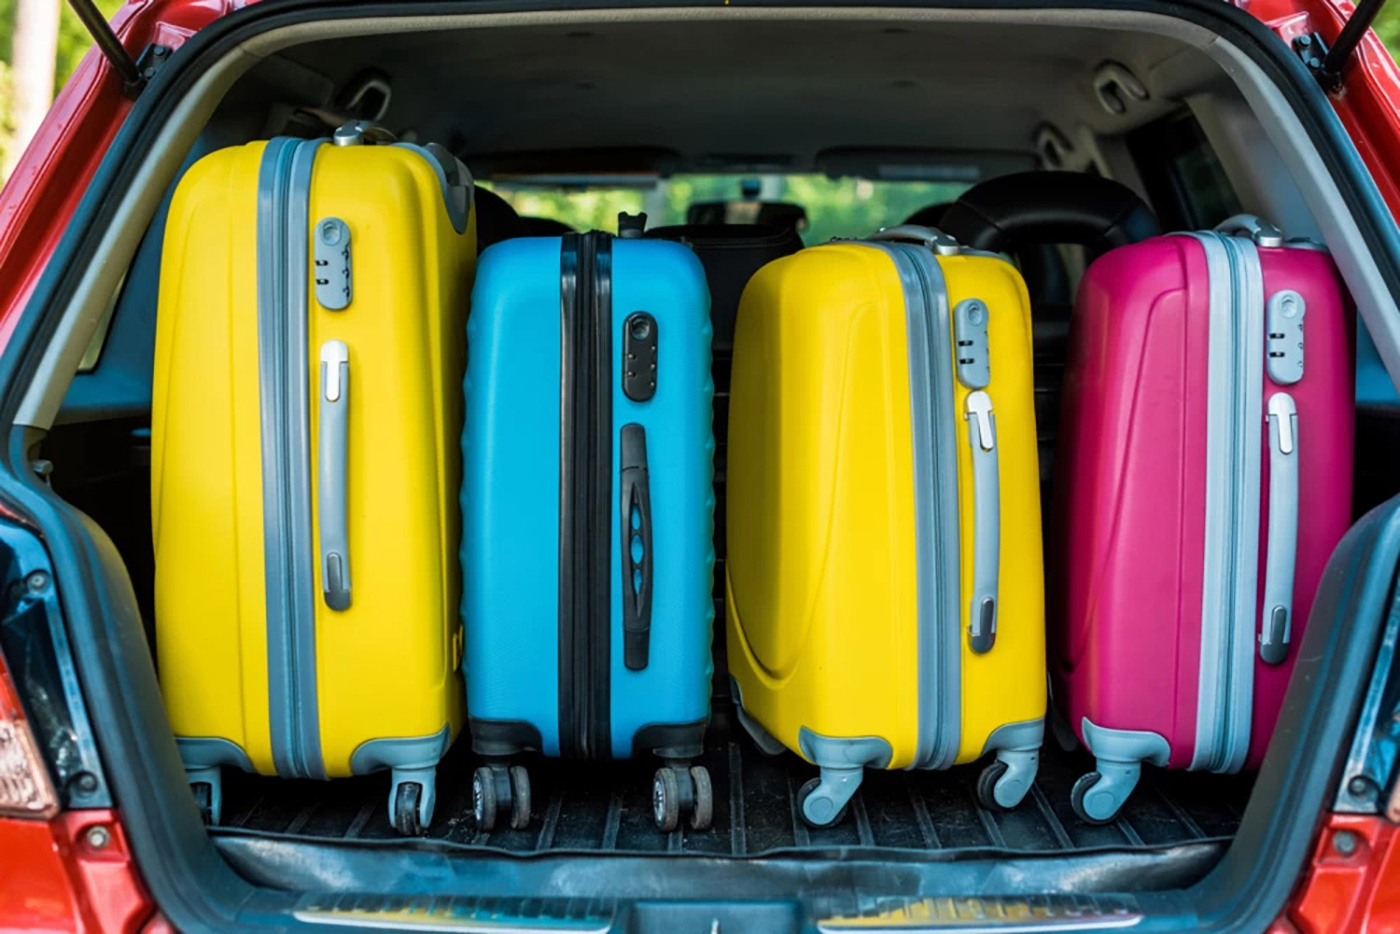 Two bright yellow suitcases, a bright blue suitcase and a bright pink suitcase in the back of a red SUV with the hatch open.